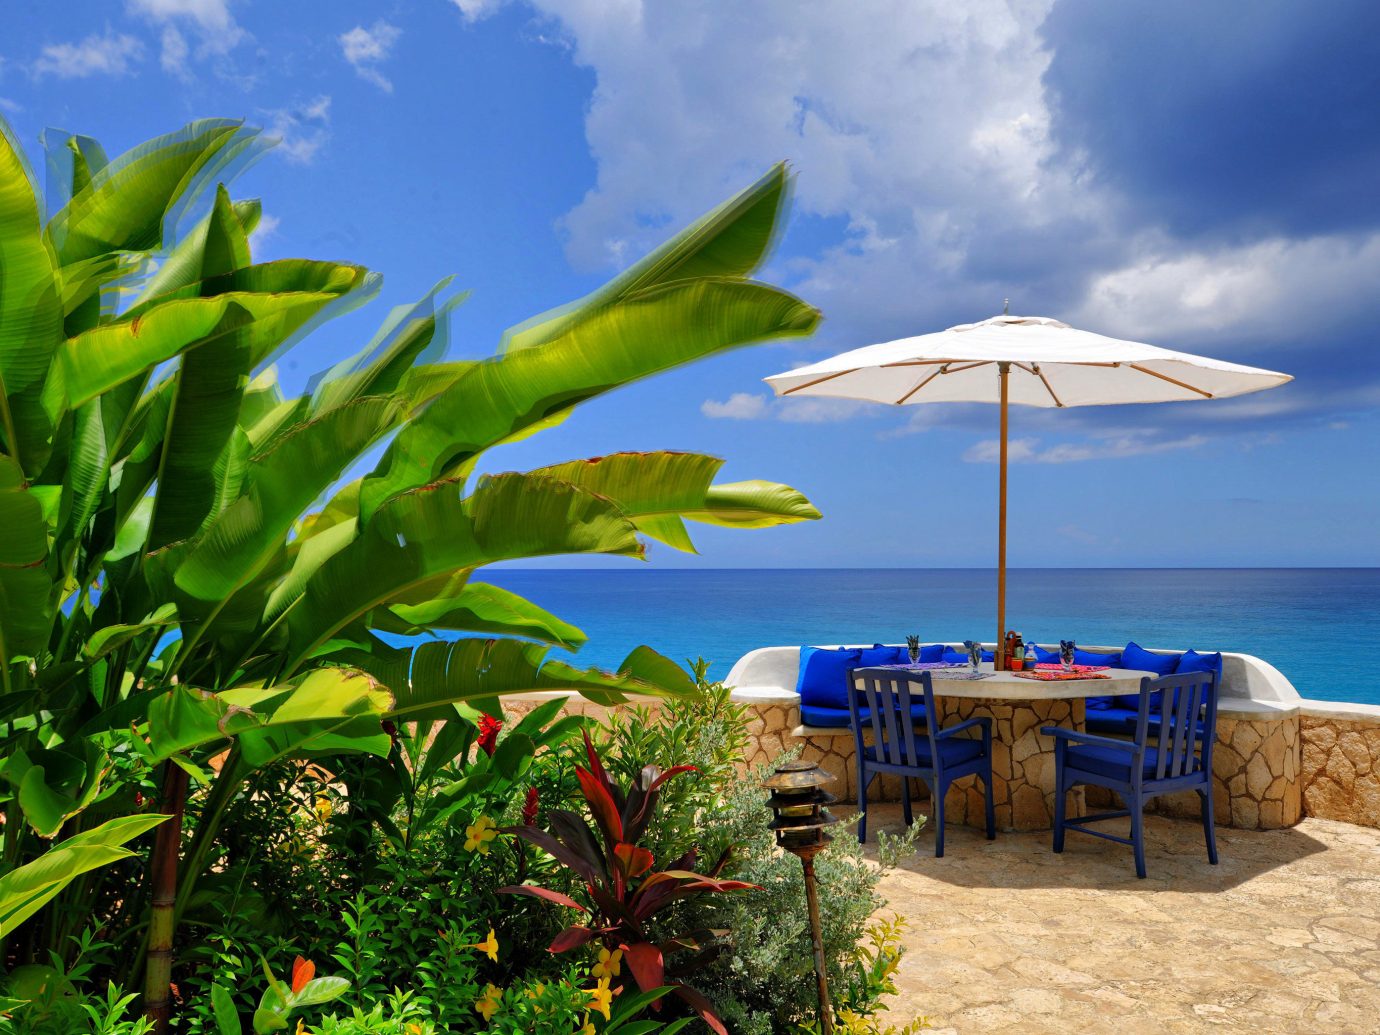 Table With A View At The Caves Hotel In Jamaica, An Adults-Only Luxury Resort